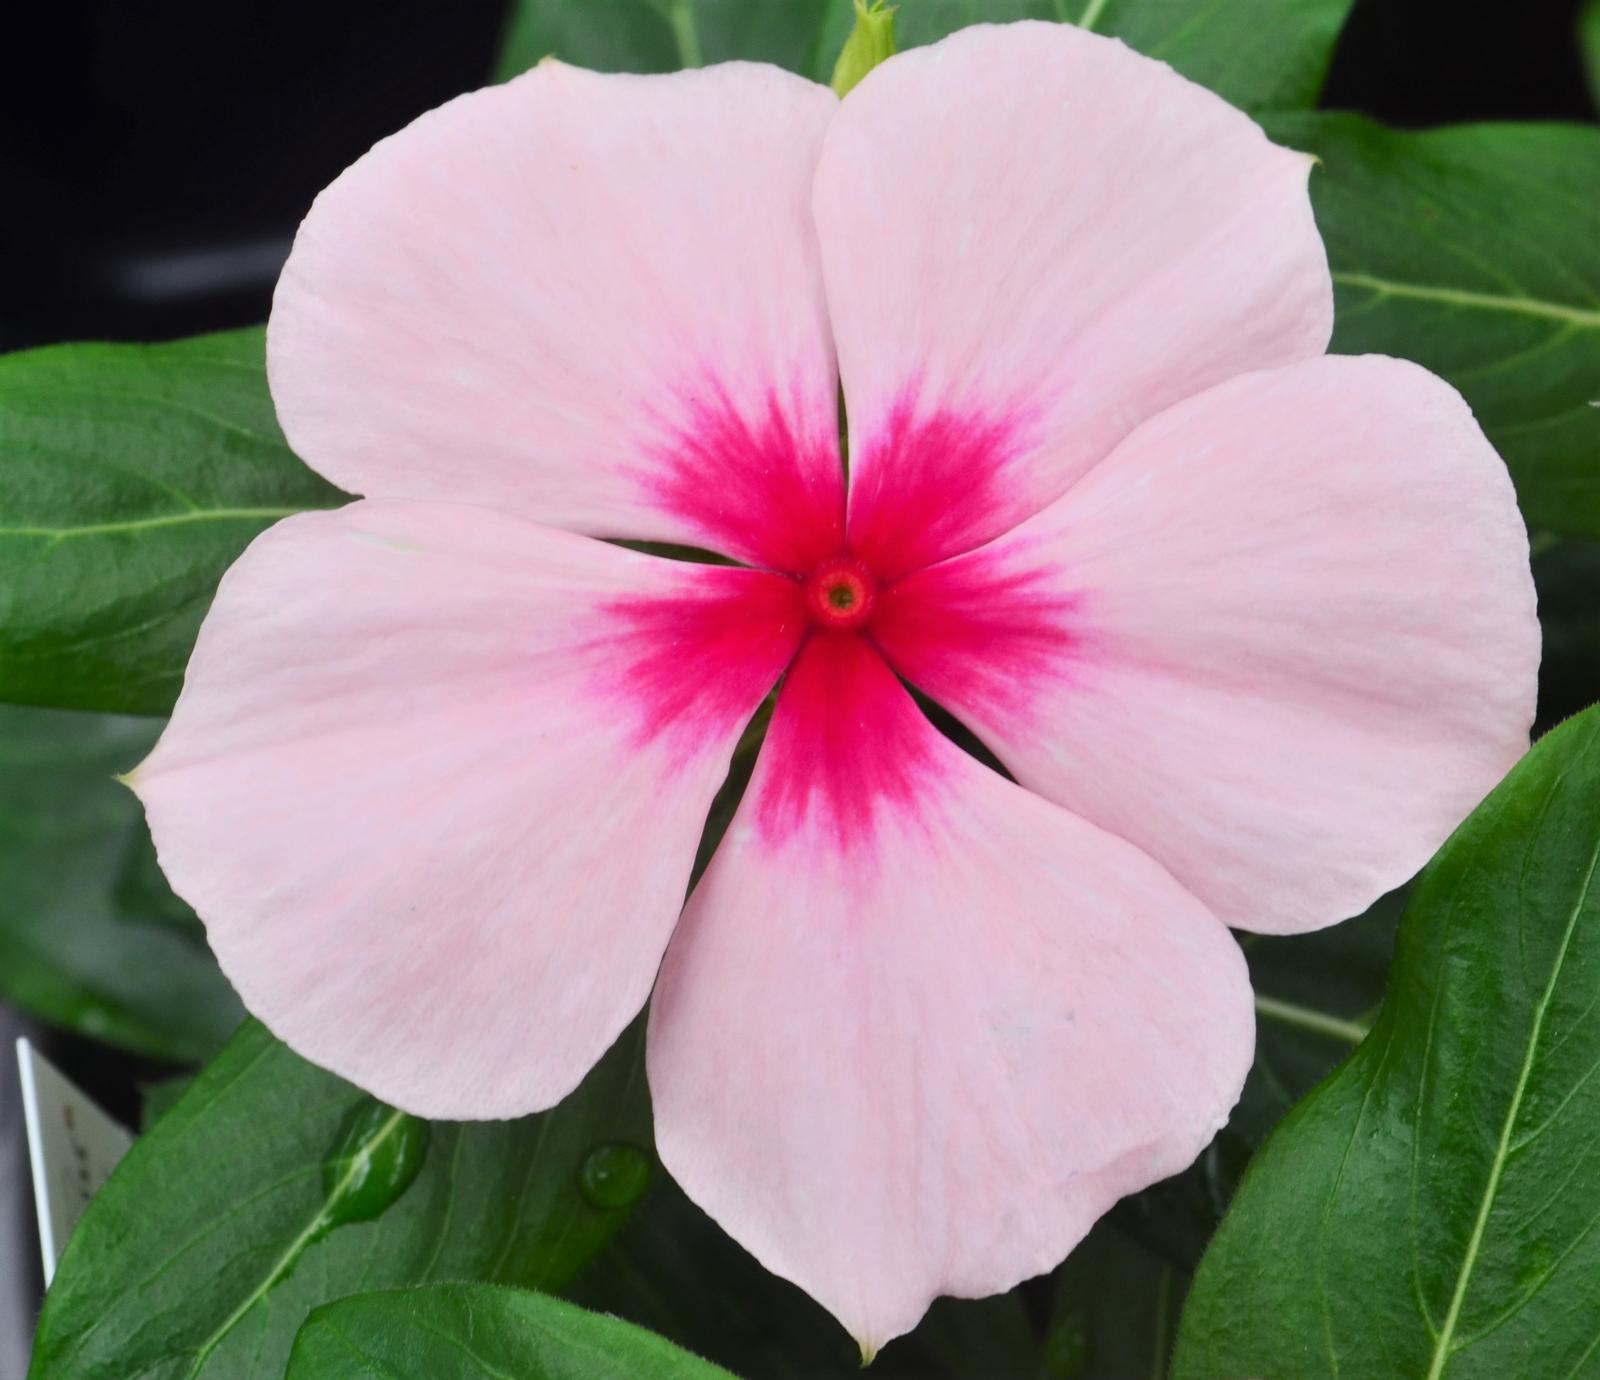 Catharanthus roseus Cora XDR 'Apricot' - Vinca Cora XDR Apricot from Hillcrest Nursery